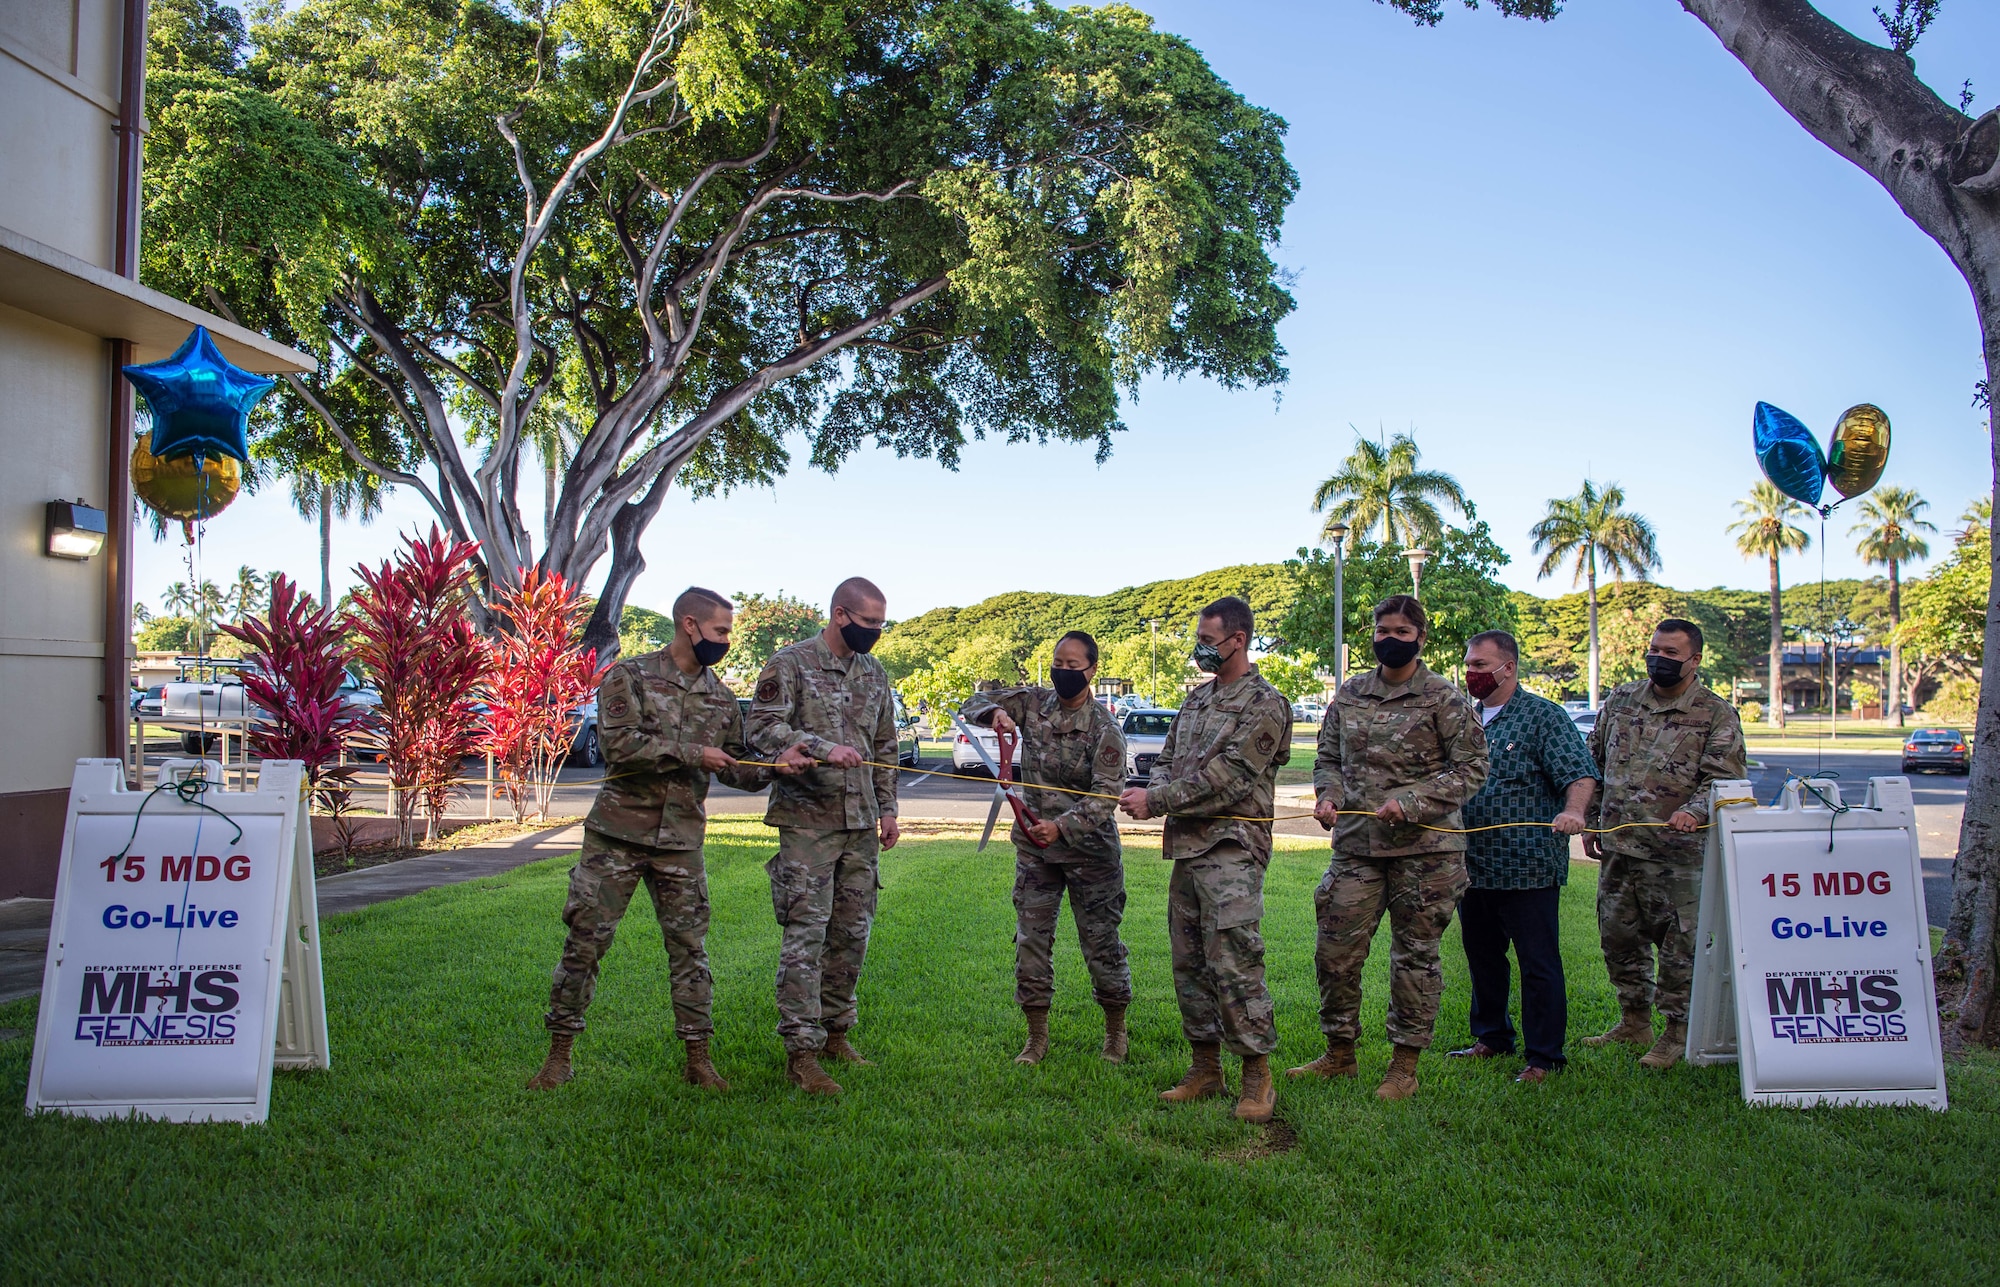 Col. Stephanie Ku, 15th Medical Group commander, cuts a cord with 15th MDG members and Military Health System Genesis project integrators during the MHS Genesis launch ceremony at Joint Base Pearl Harbor-Hickam, Hawaii, Sept. 25, 2021. More than 9.5 million Department of Defense beneficiaries are able to access their electronic health care records through the new electronic health record system. (U.S. Air Force photo by Senior Airman Alan Ricker)